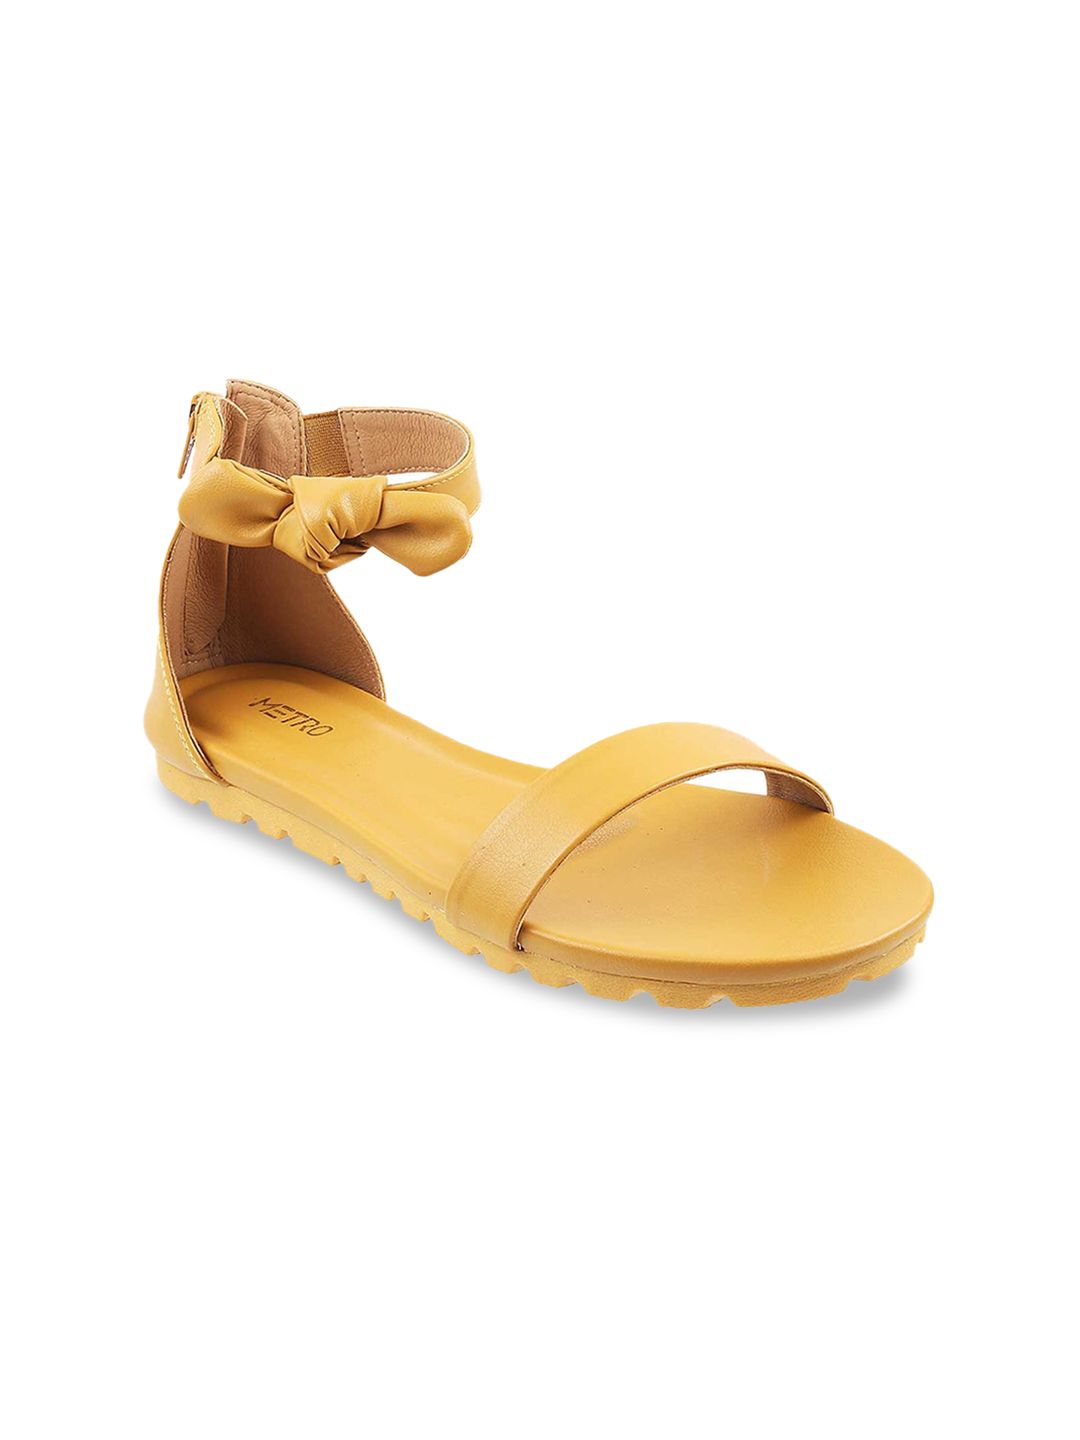 Metro Women Yellow Open Toe Flats with Bows Price in India